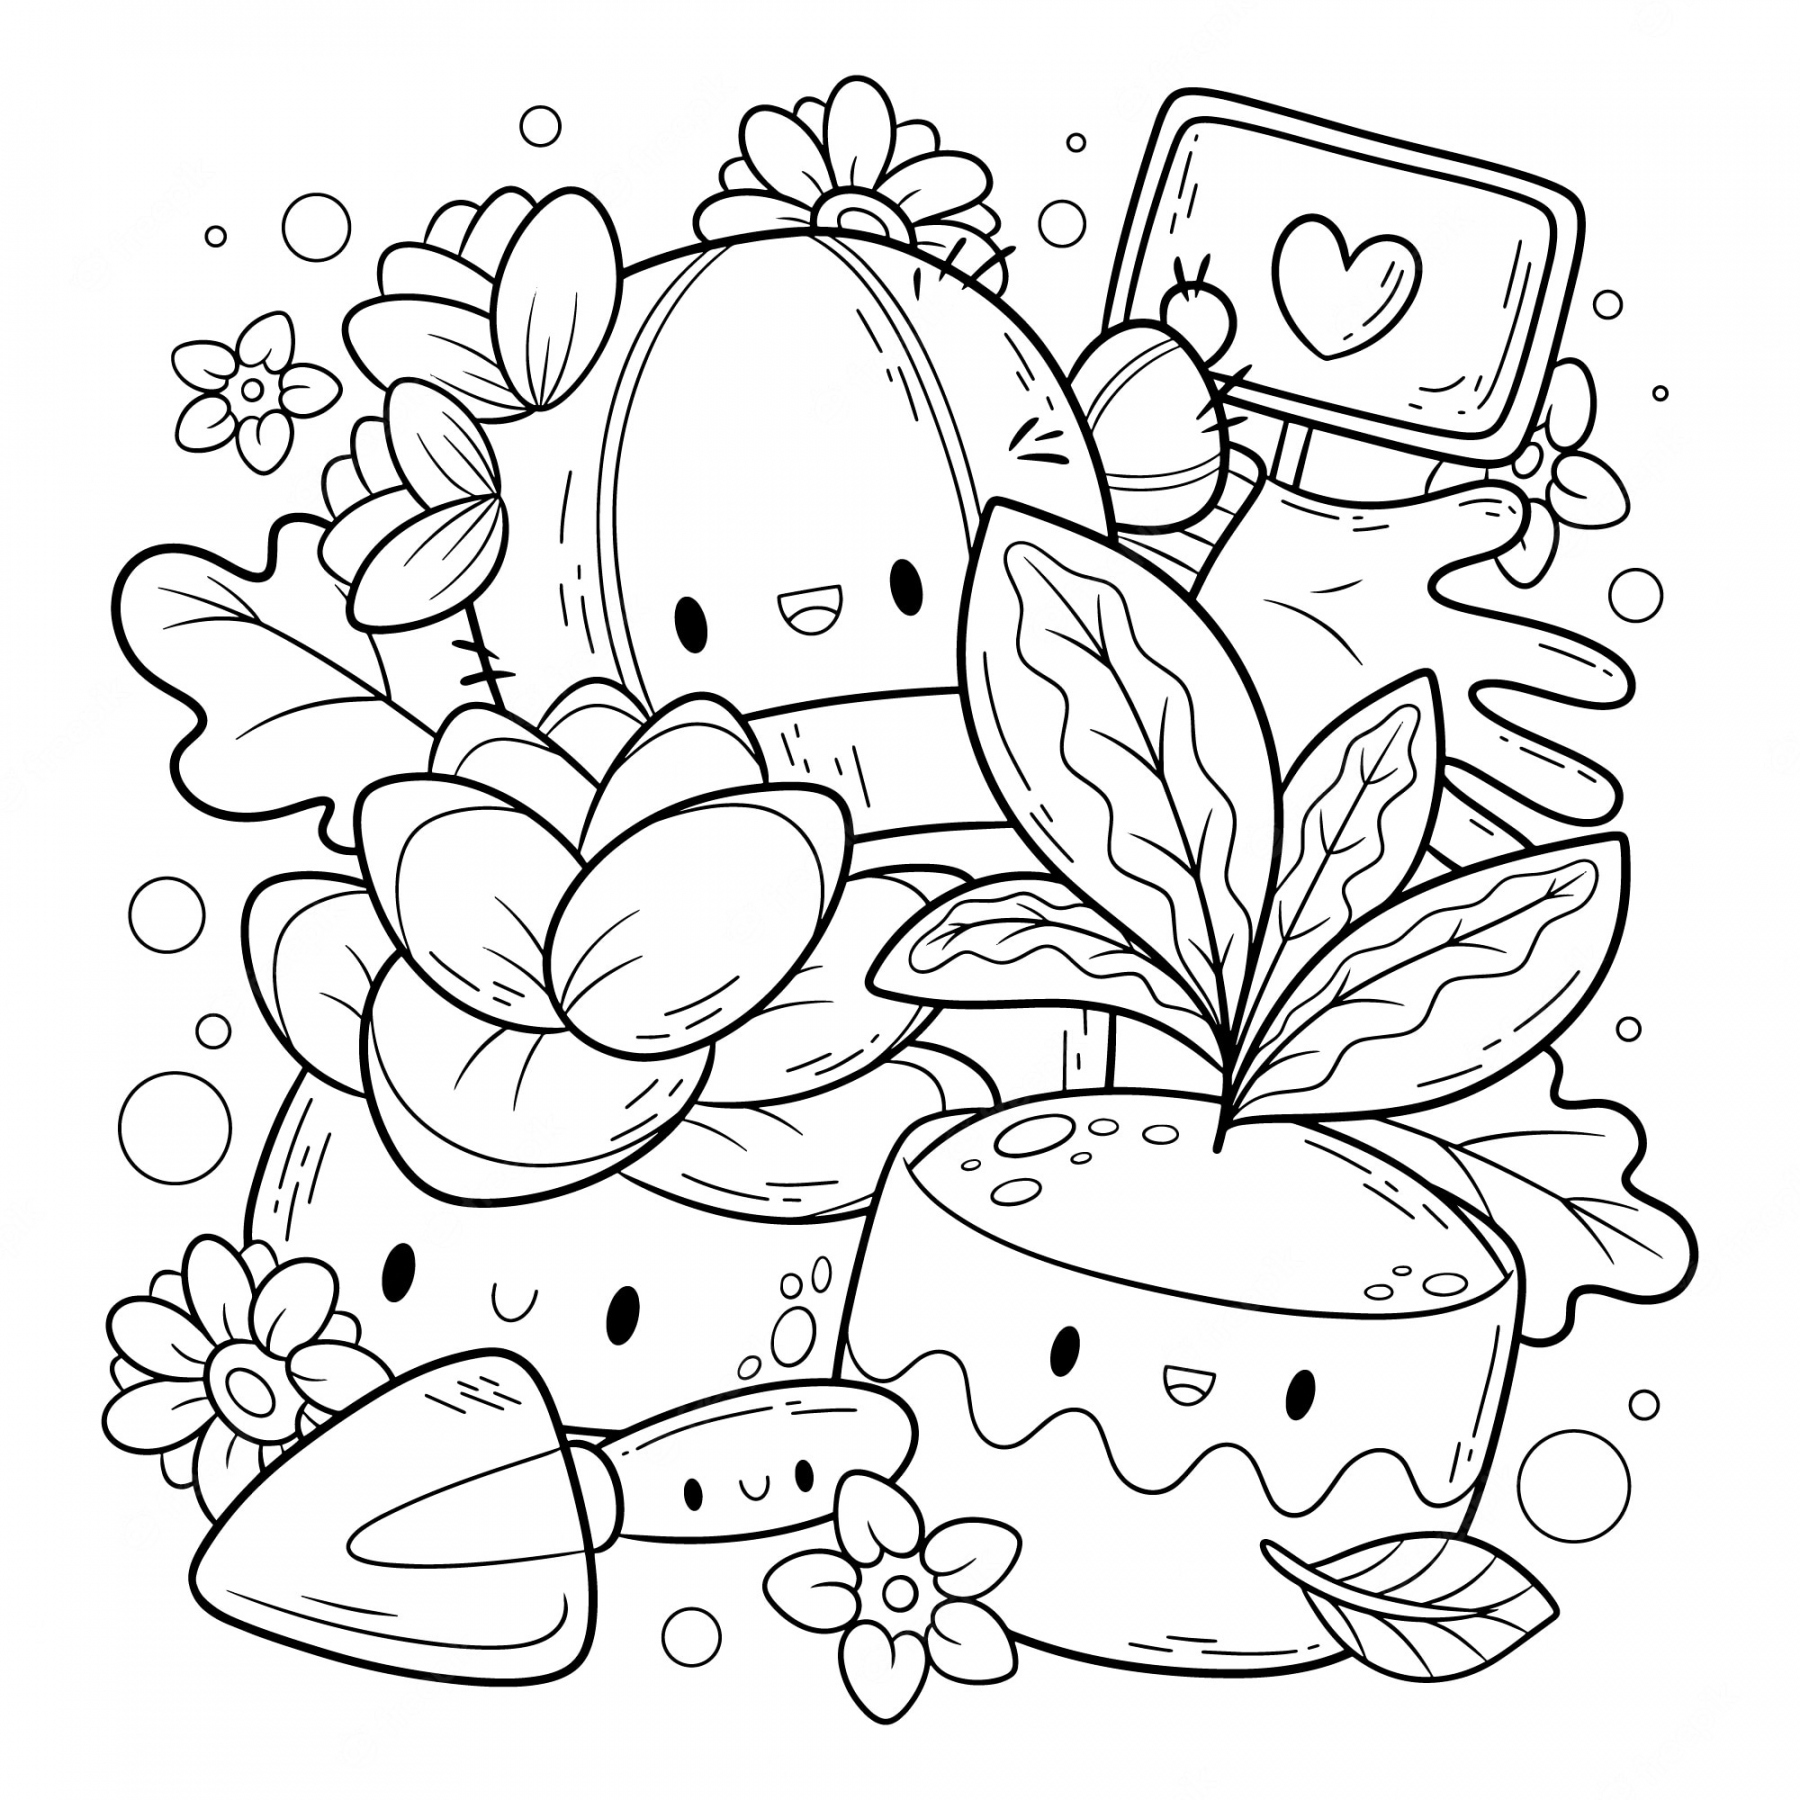 Kawaii Coloring Page Images - Free Download on Freepik - FREE Printables - Cute Free Printable Coloring Pages